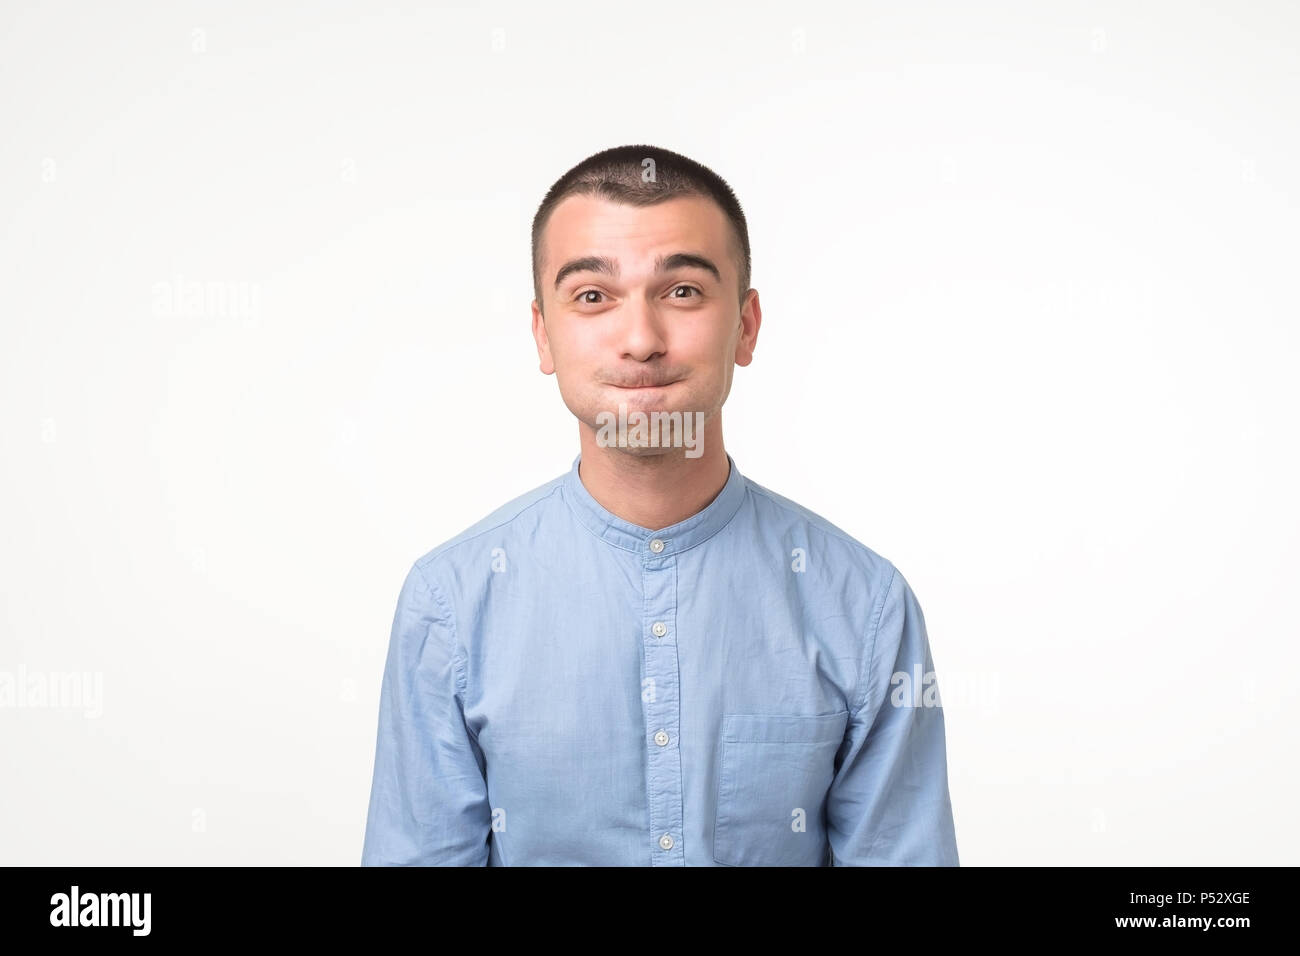 Funny young man in blue shirt grimacing, staring at camera nflating cheeks, holding his breath, trying hard not to laugh. Try to hold emotion inside Stock Photo